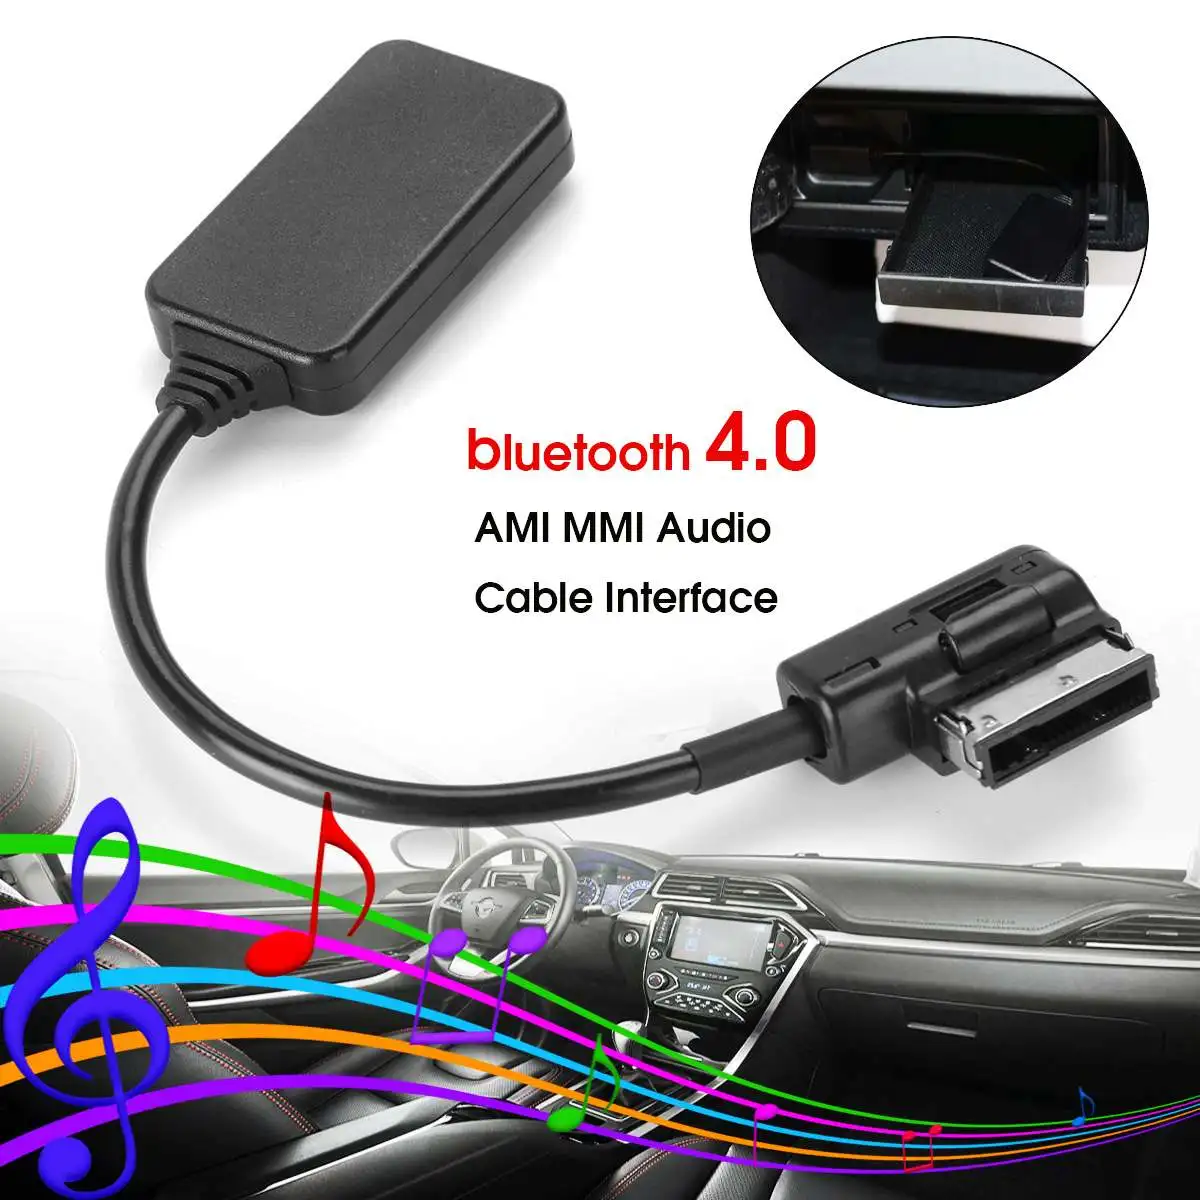 

bluetooth AUX in Audio Streaming Adapter Radio Media Interface AMI MMI for MERCEDES-Benz C-CLASS E-CLASS CLS W212 S212 C207